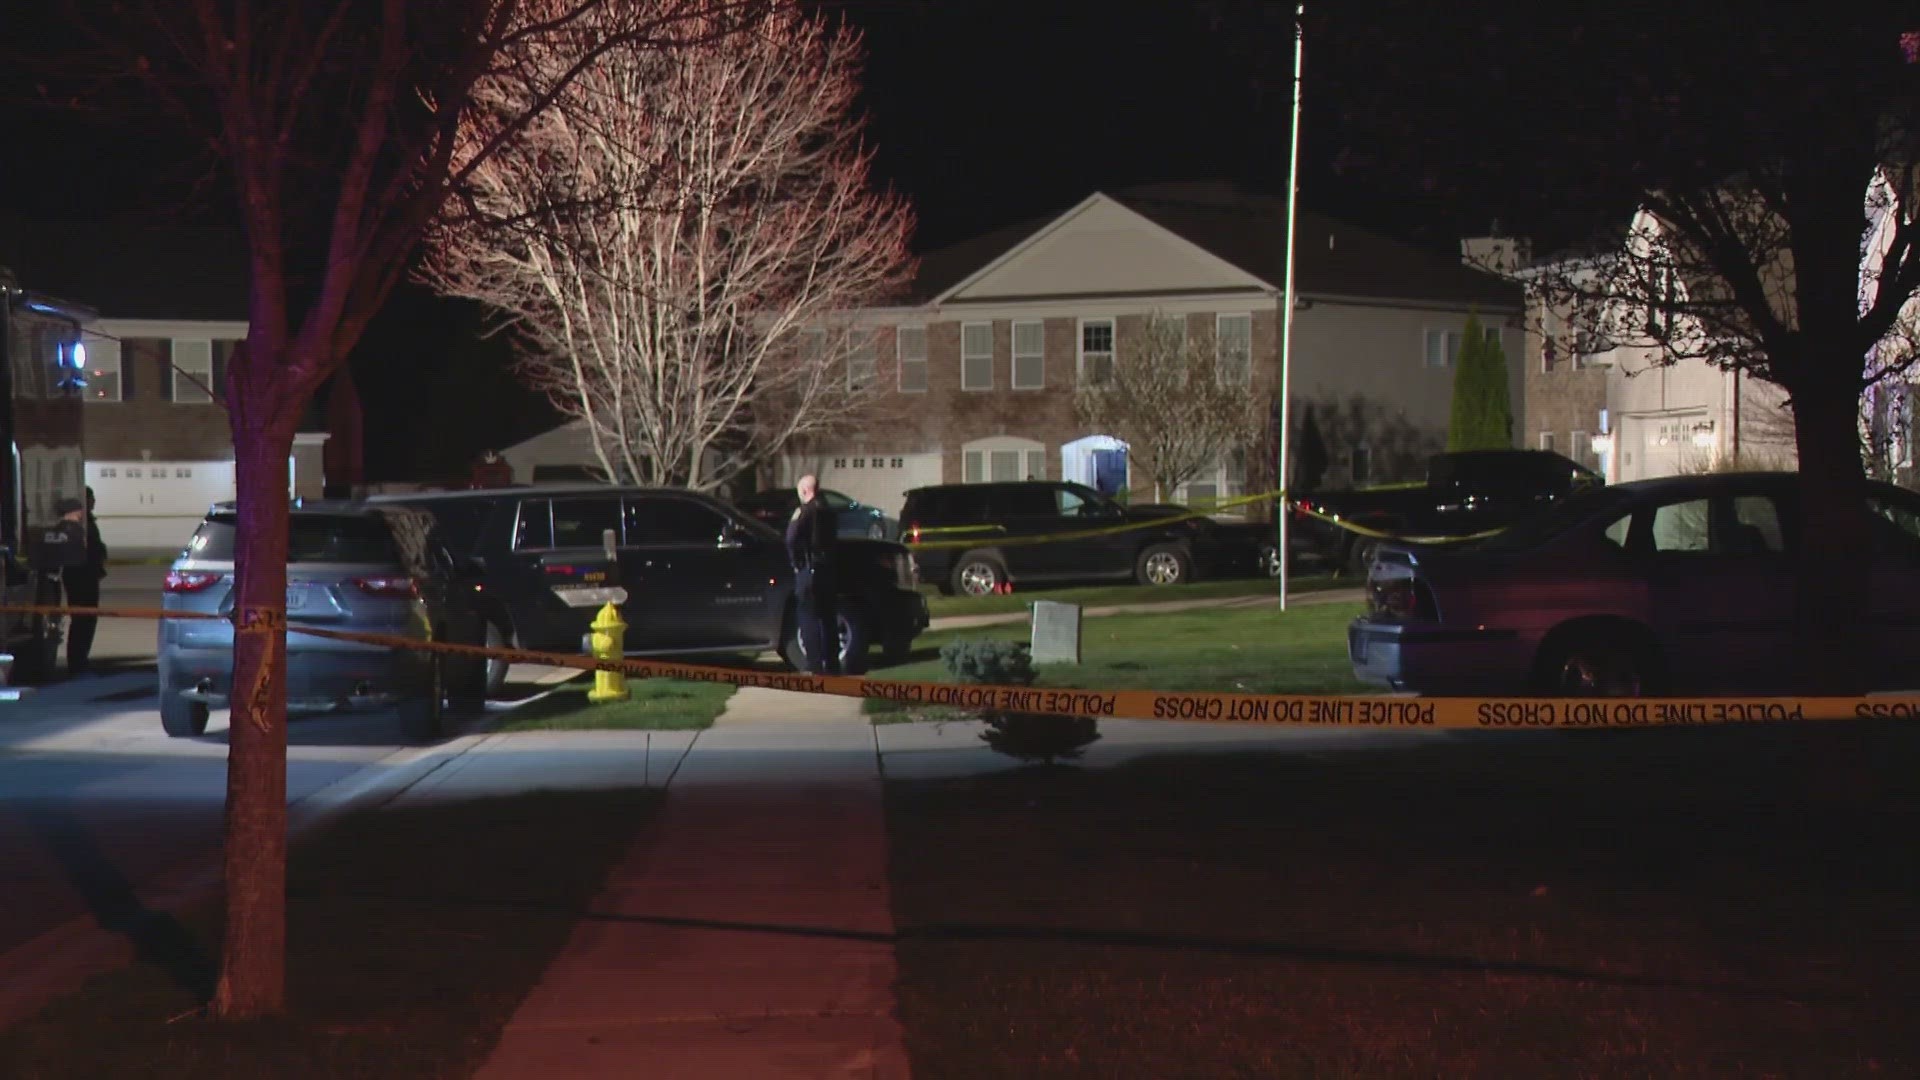 New details on deadly shooting at Noblesville home wthr com